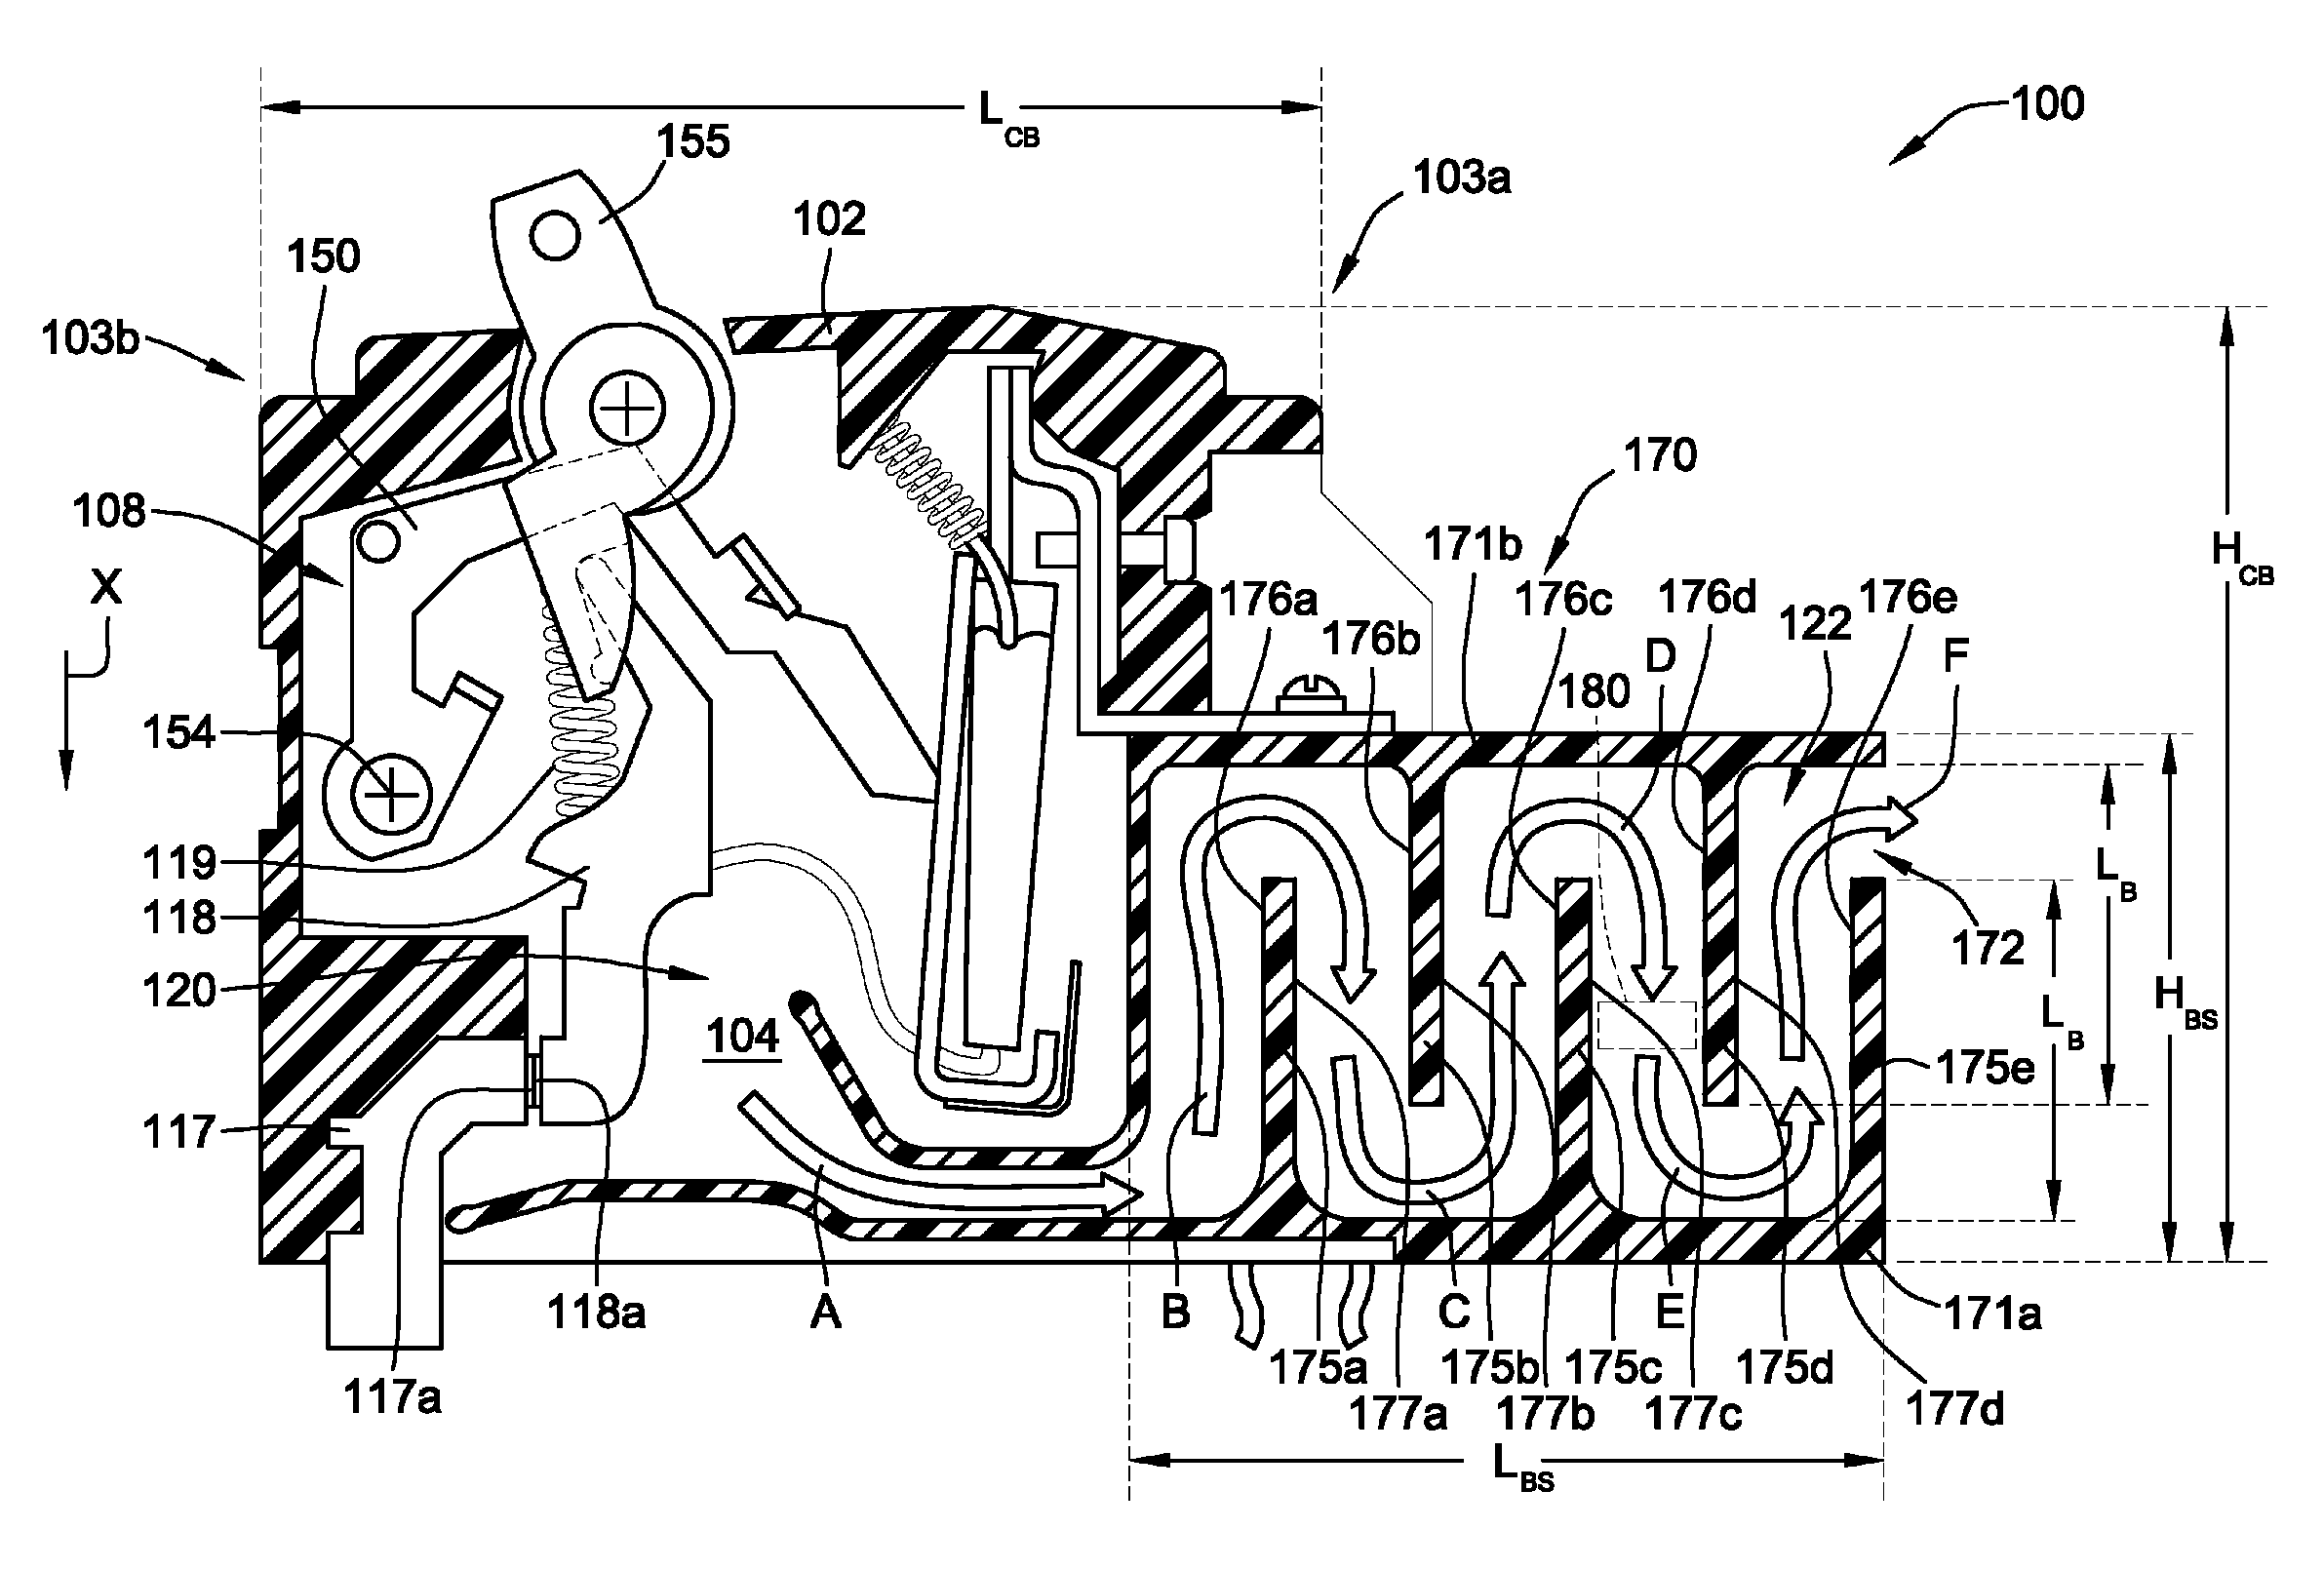 Circuit breaker with controlled exhaust